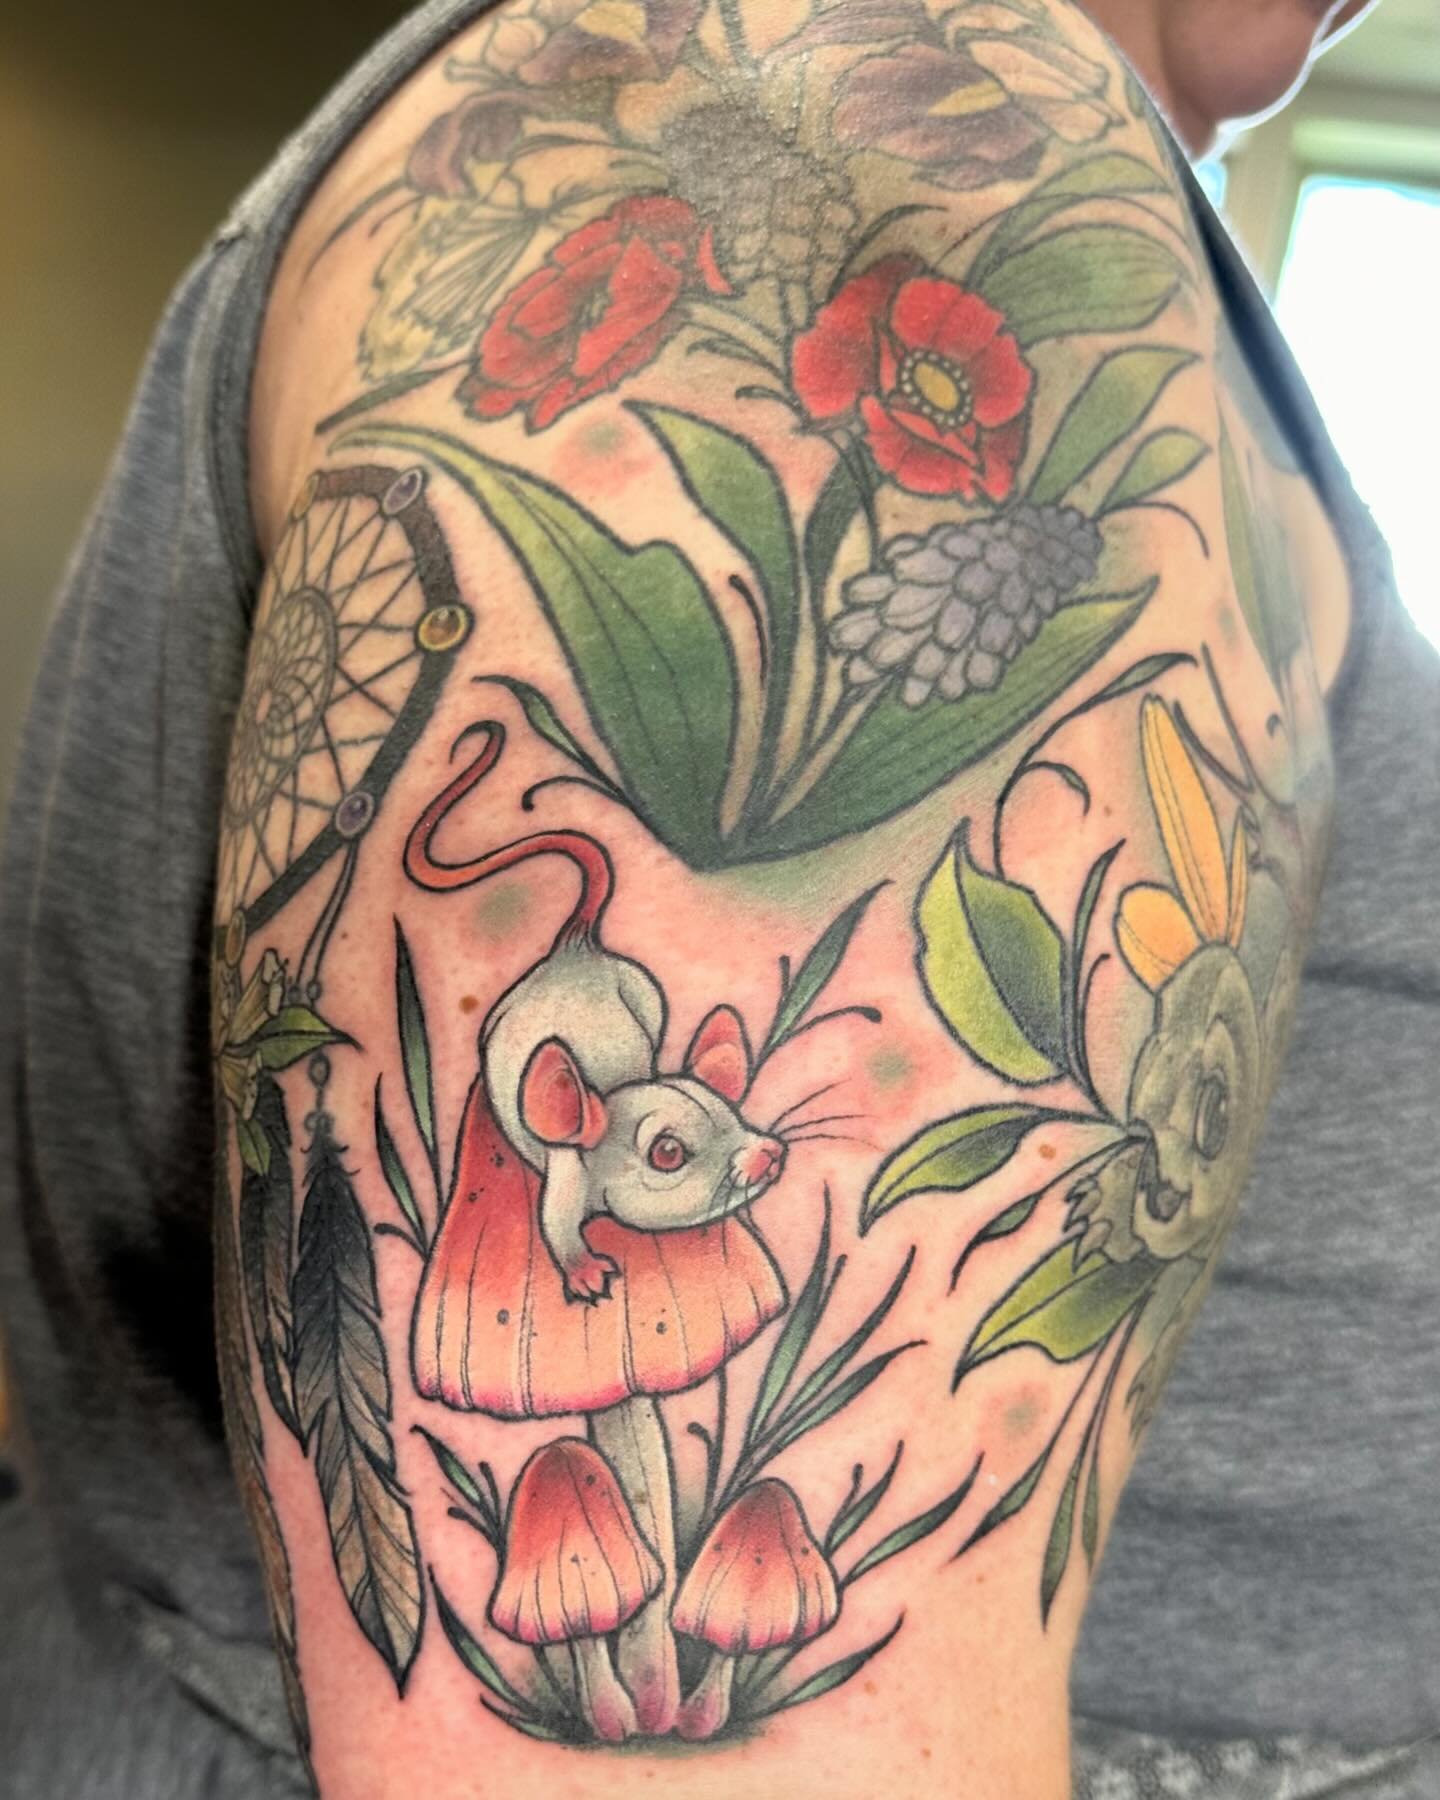 Rounded out this half sleeve with this cute little mouse!